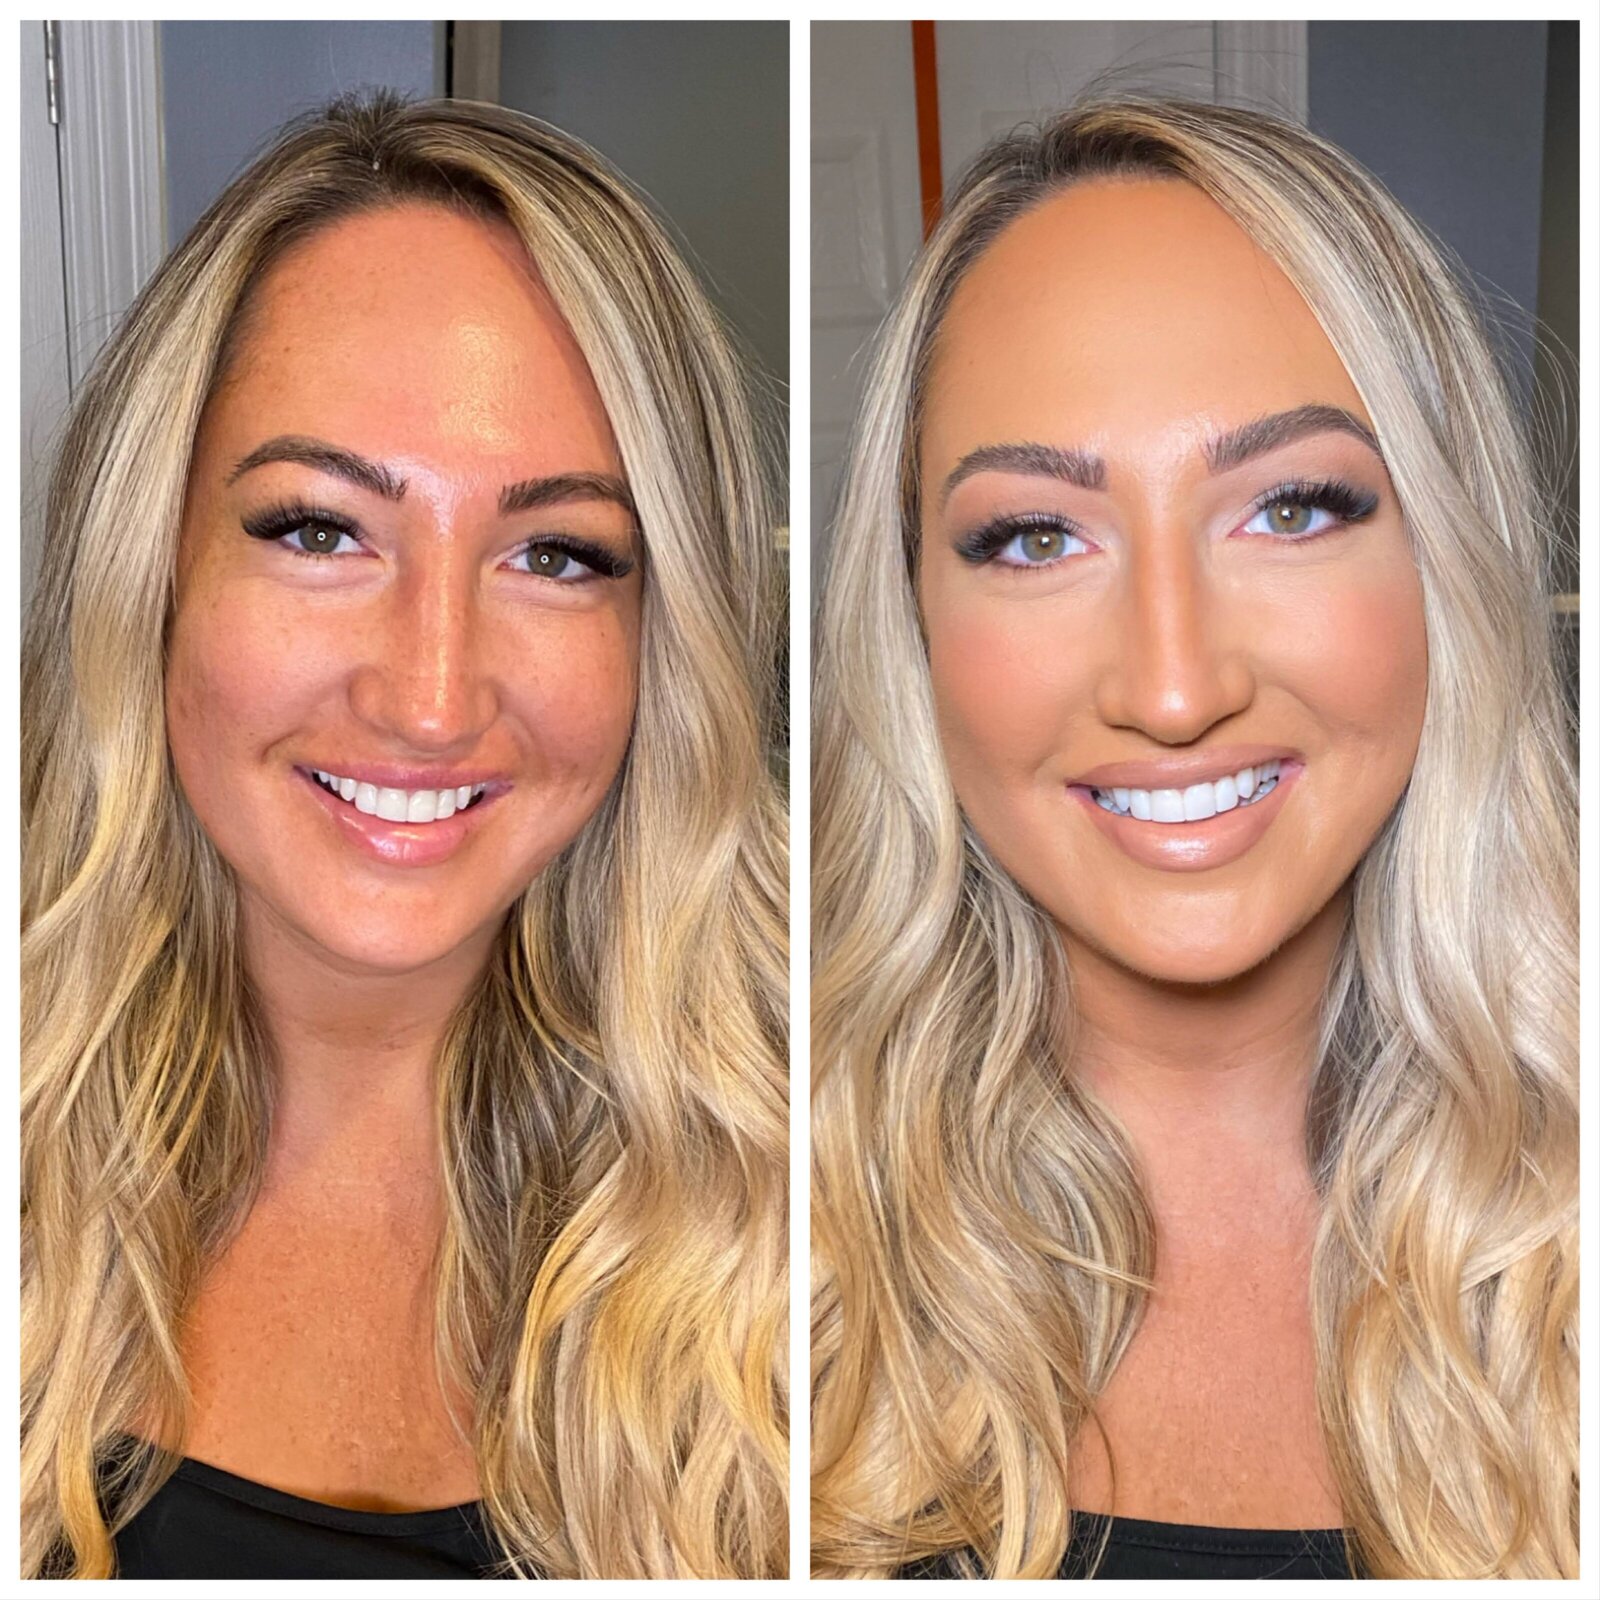 NJ bride wedding makeup before and after